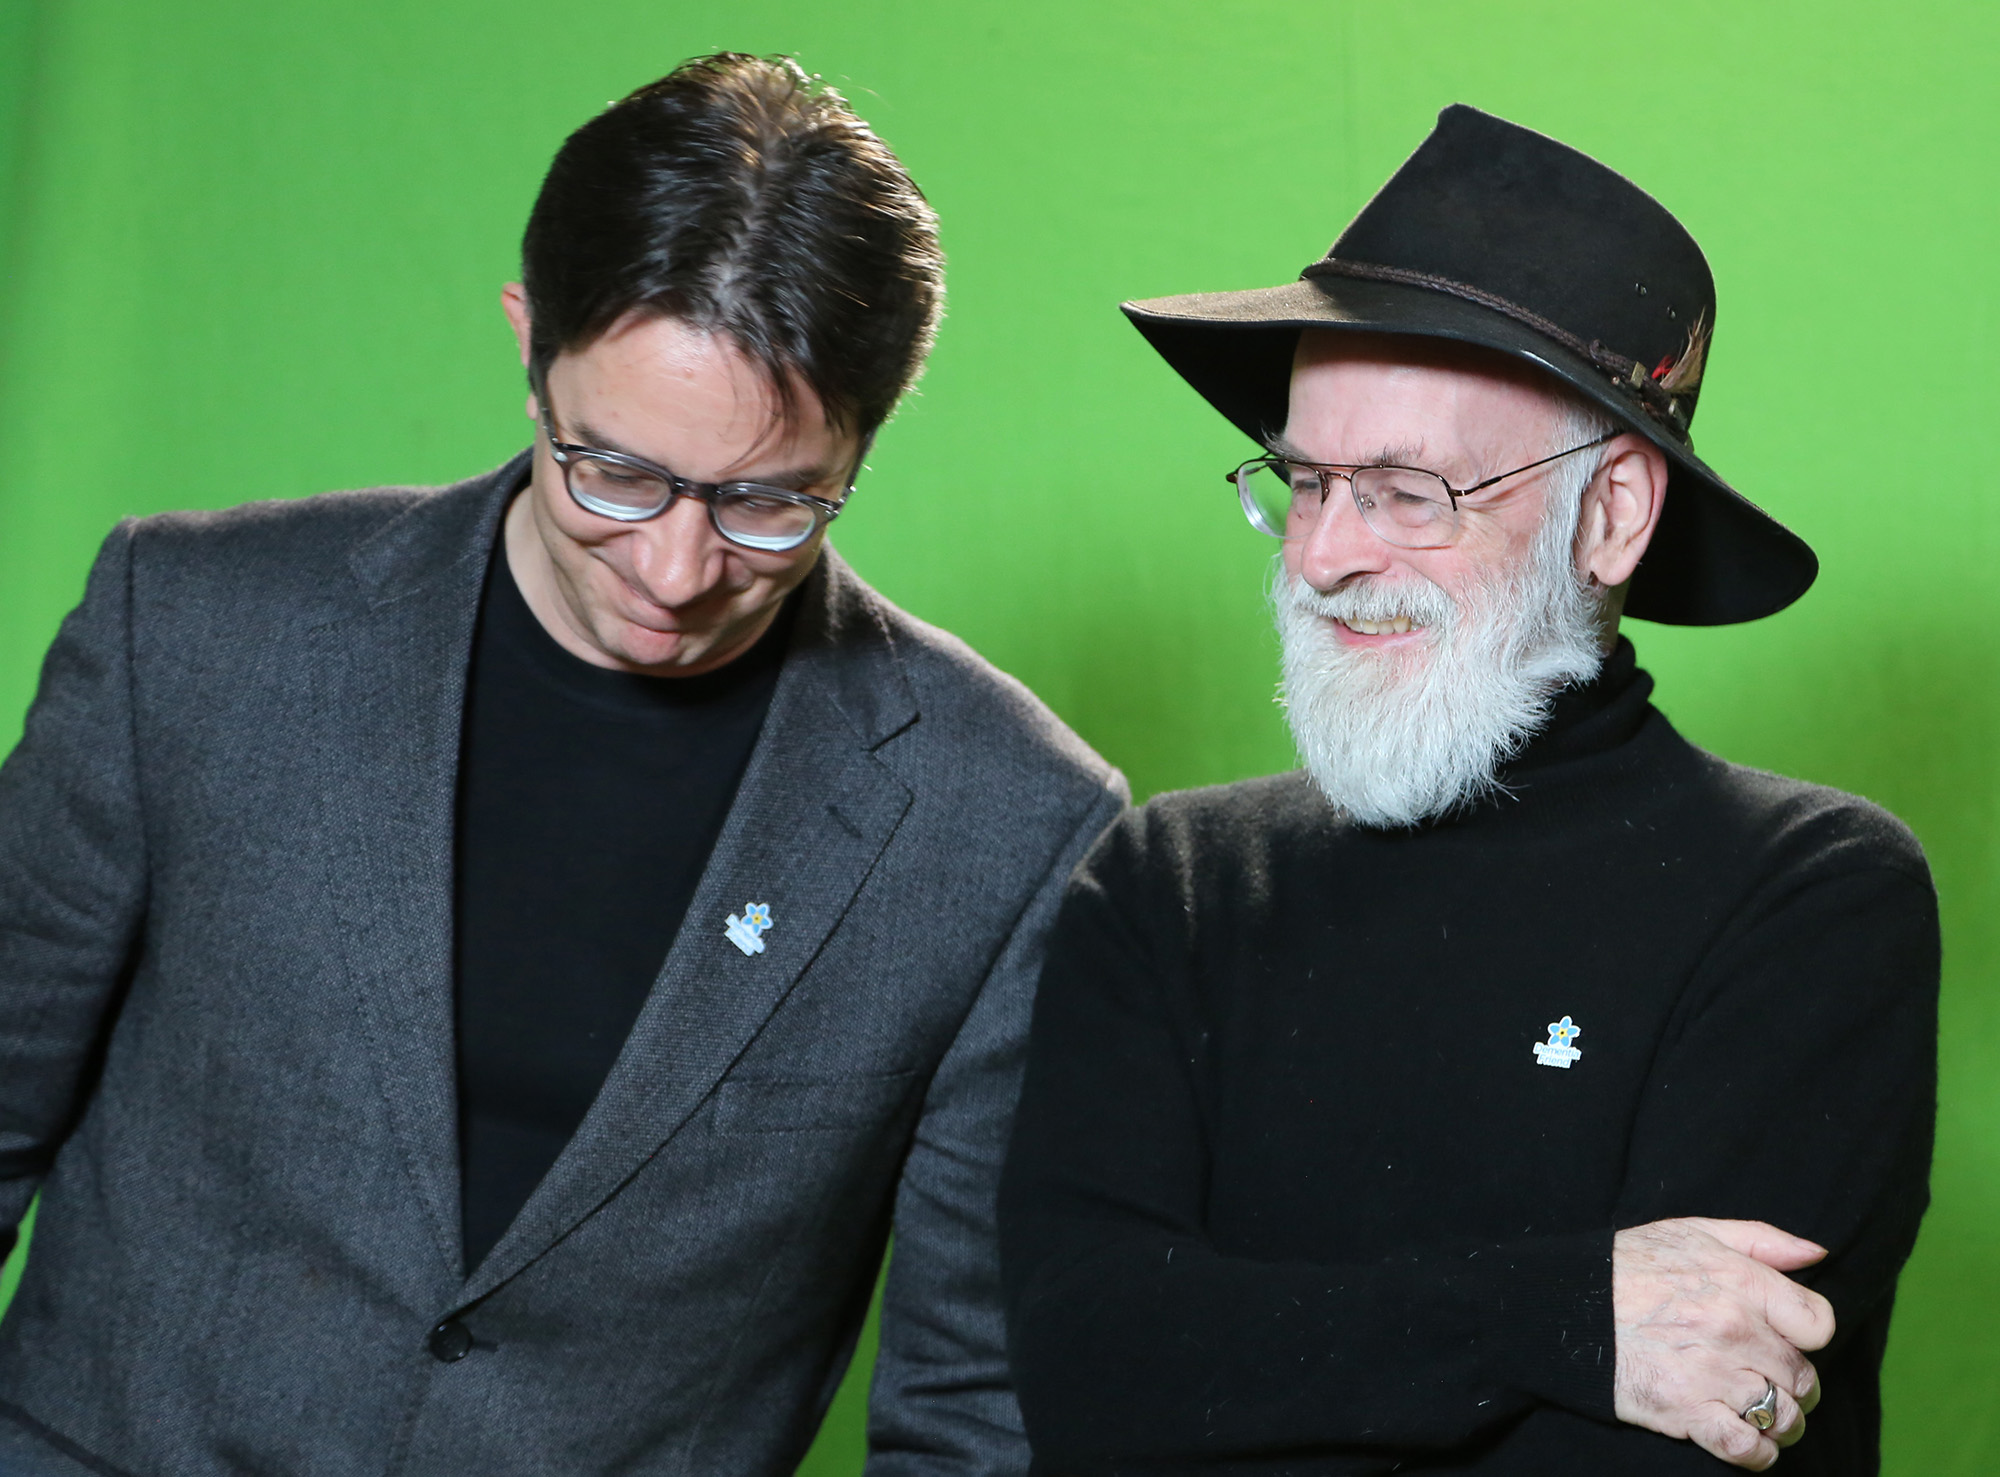 Terry Pratchett: A Life With Footnotes by Rob Wilkins - Penguin Books  Australia